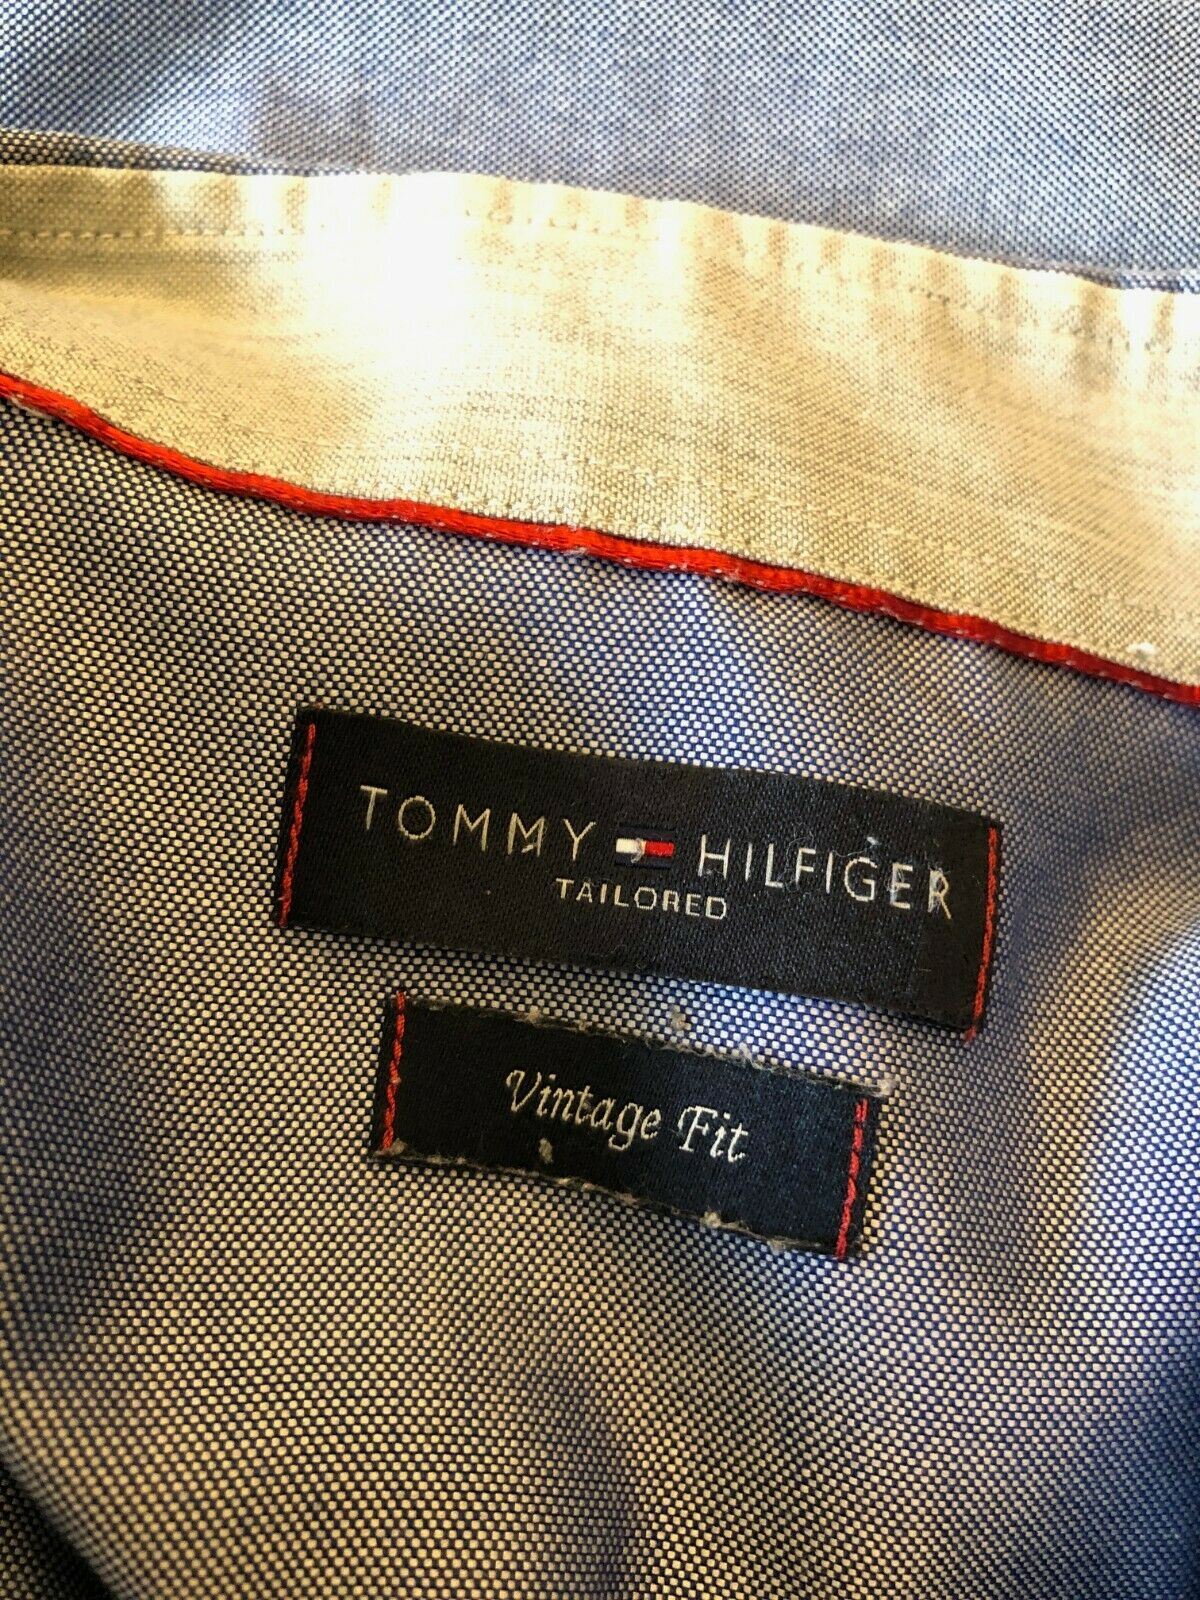 Tommy Hilfiger Men's Mid Blue Elbow Patch Long Sleeve Shirt Size 40 15 3/4" Timeless Fashions